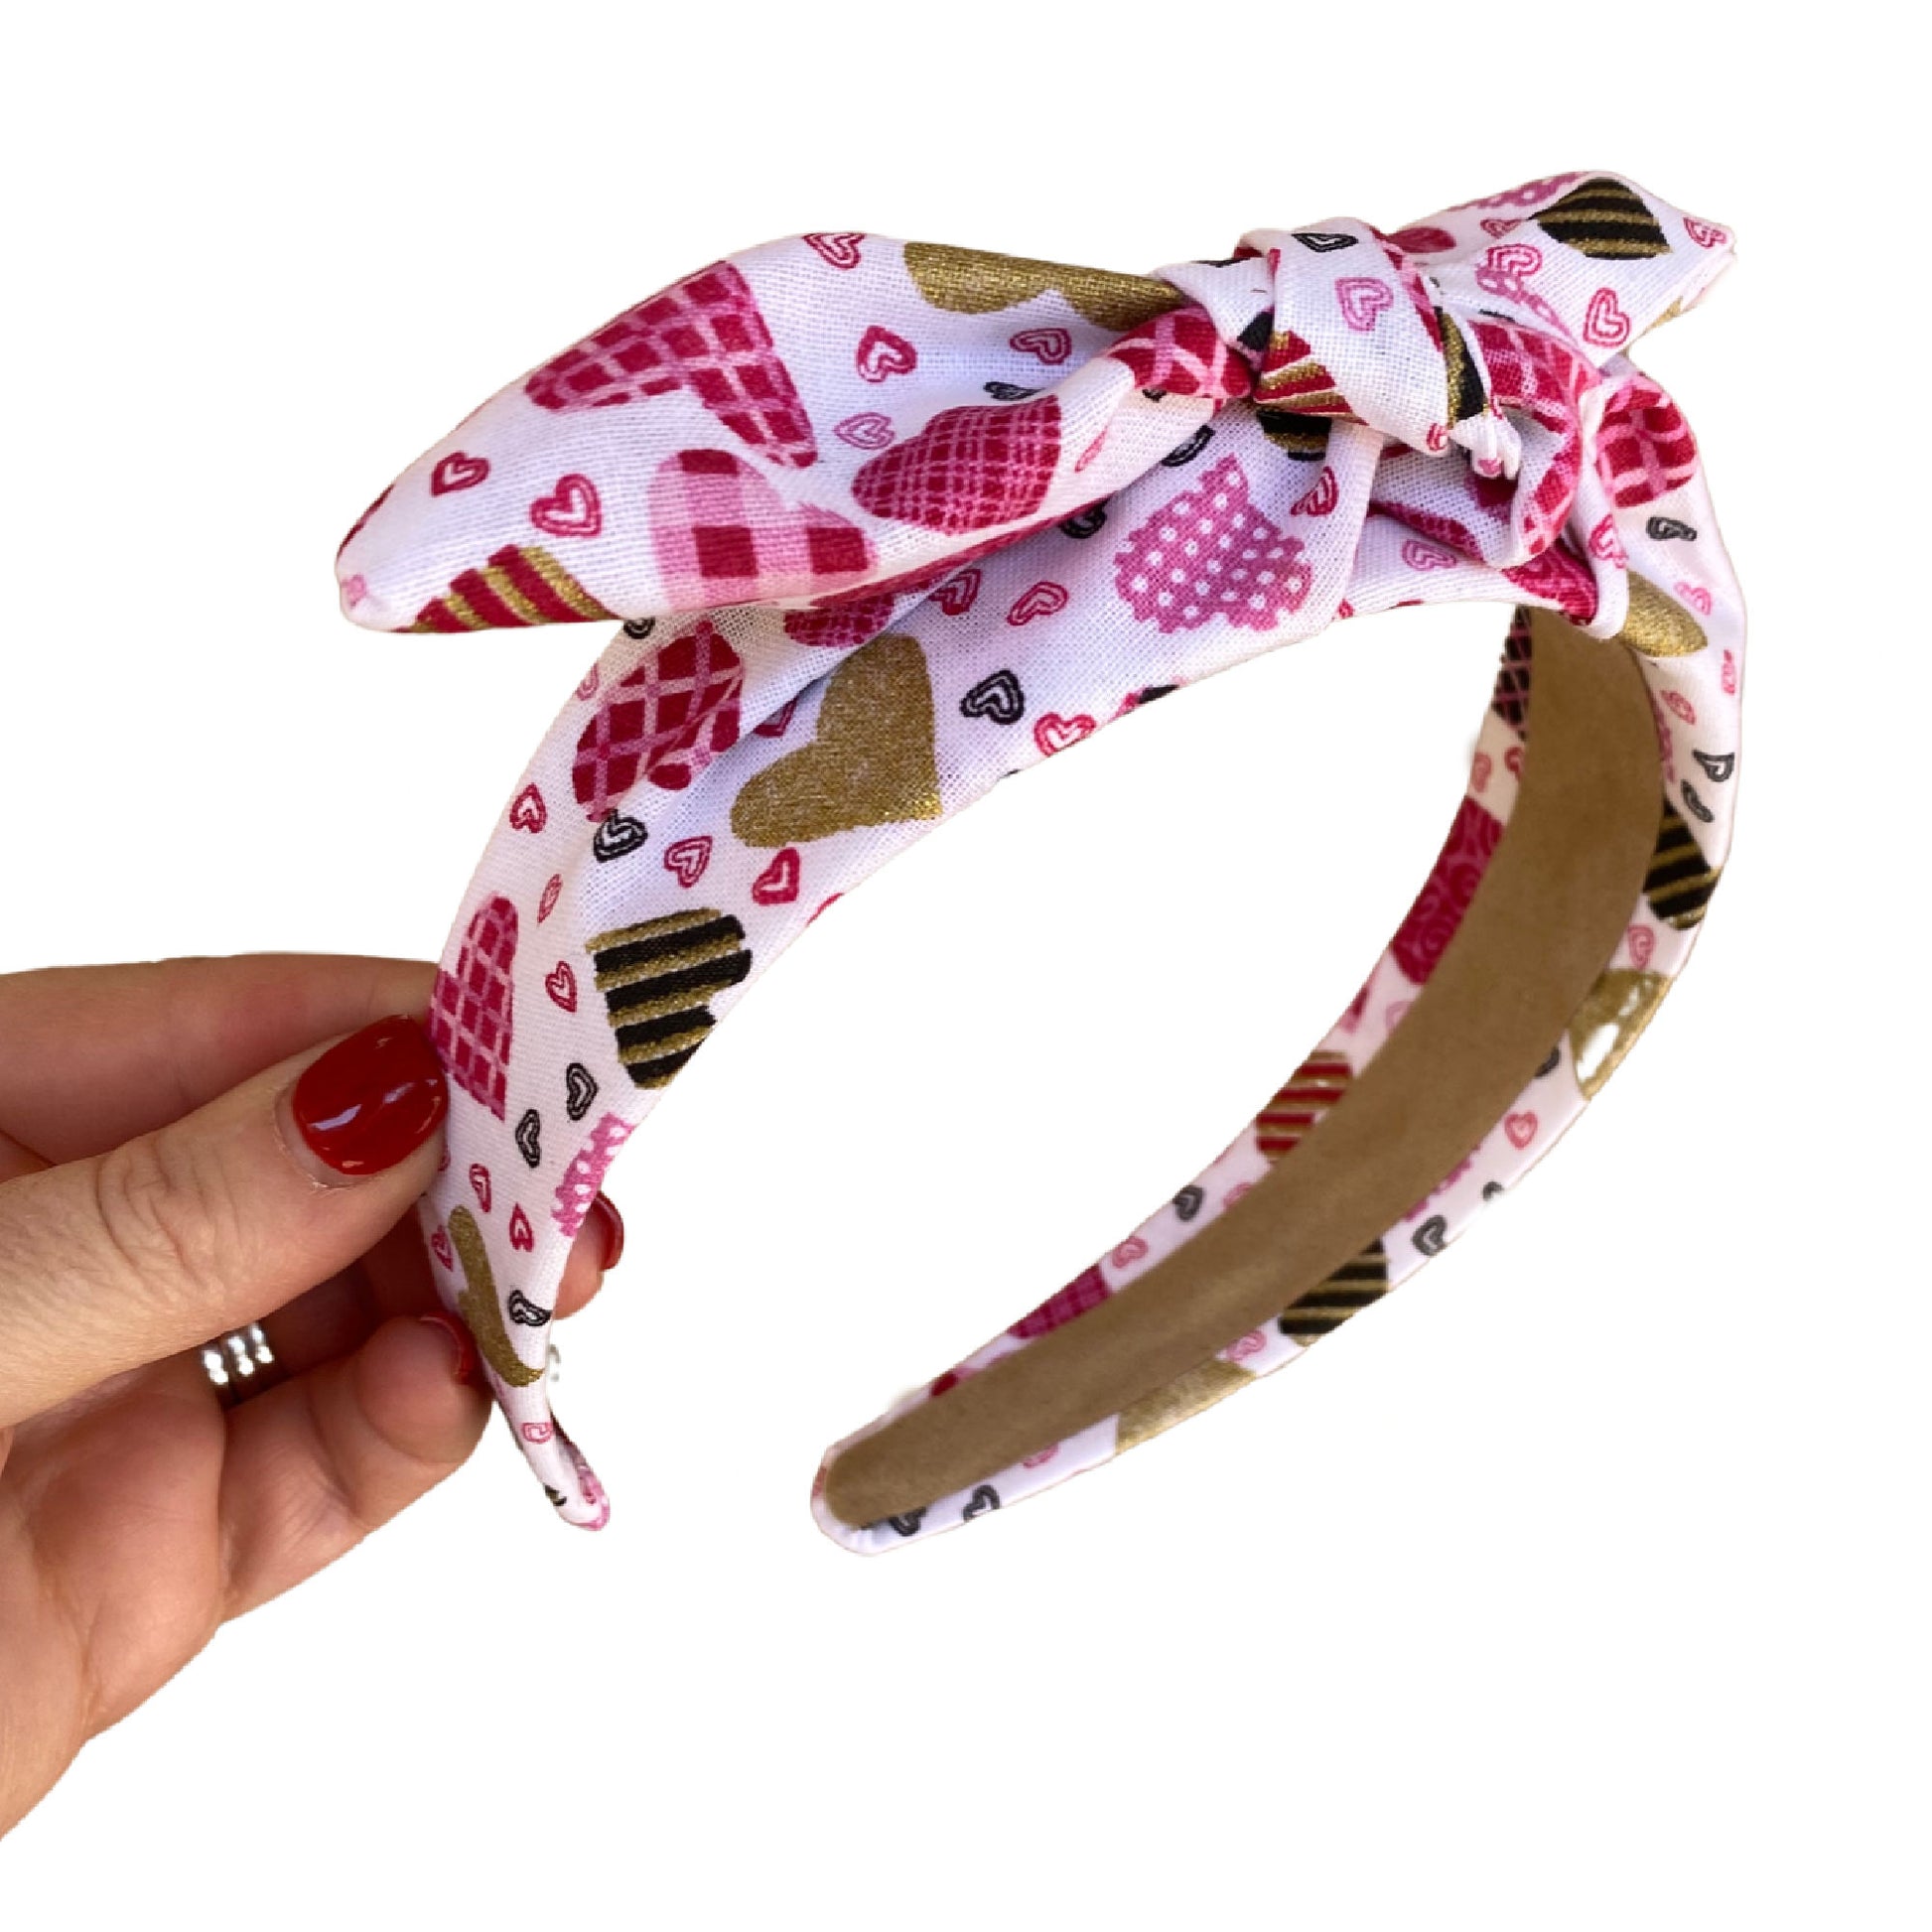 Headband that is pre tied with a tie on the top. Heart patchwork print throughout. 